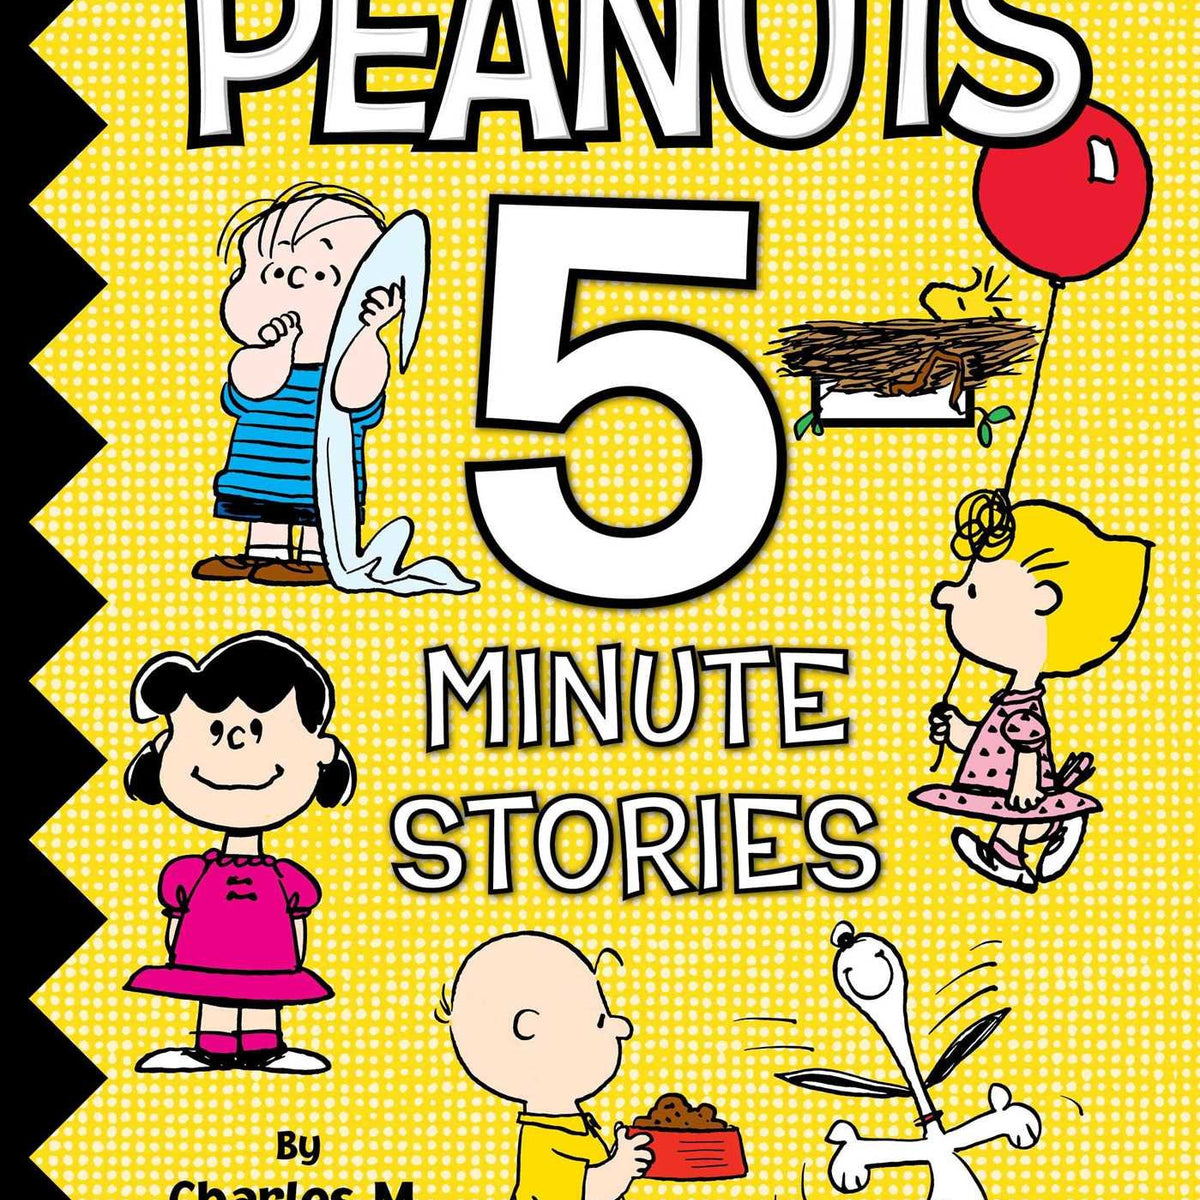 Peanuts 5 Minute Stories by Charles M. Schulz — Snoopy's Gallery